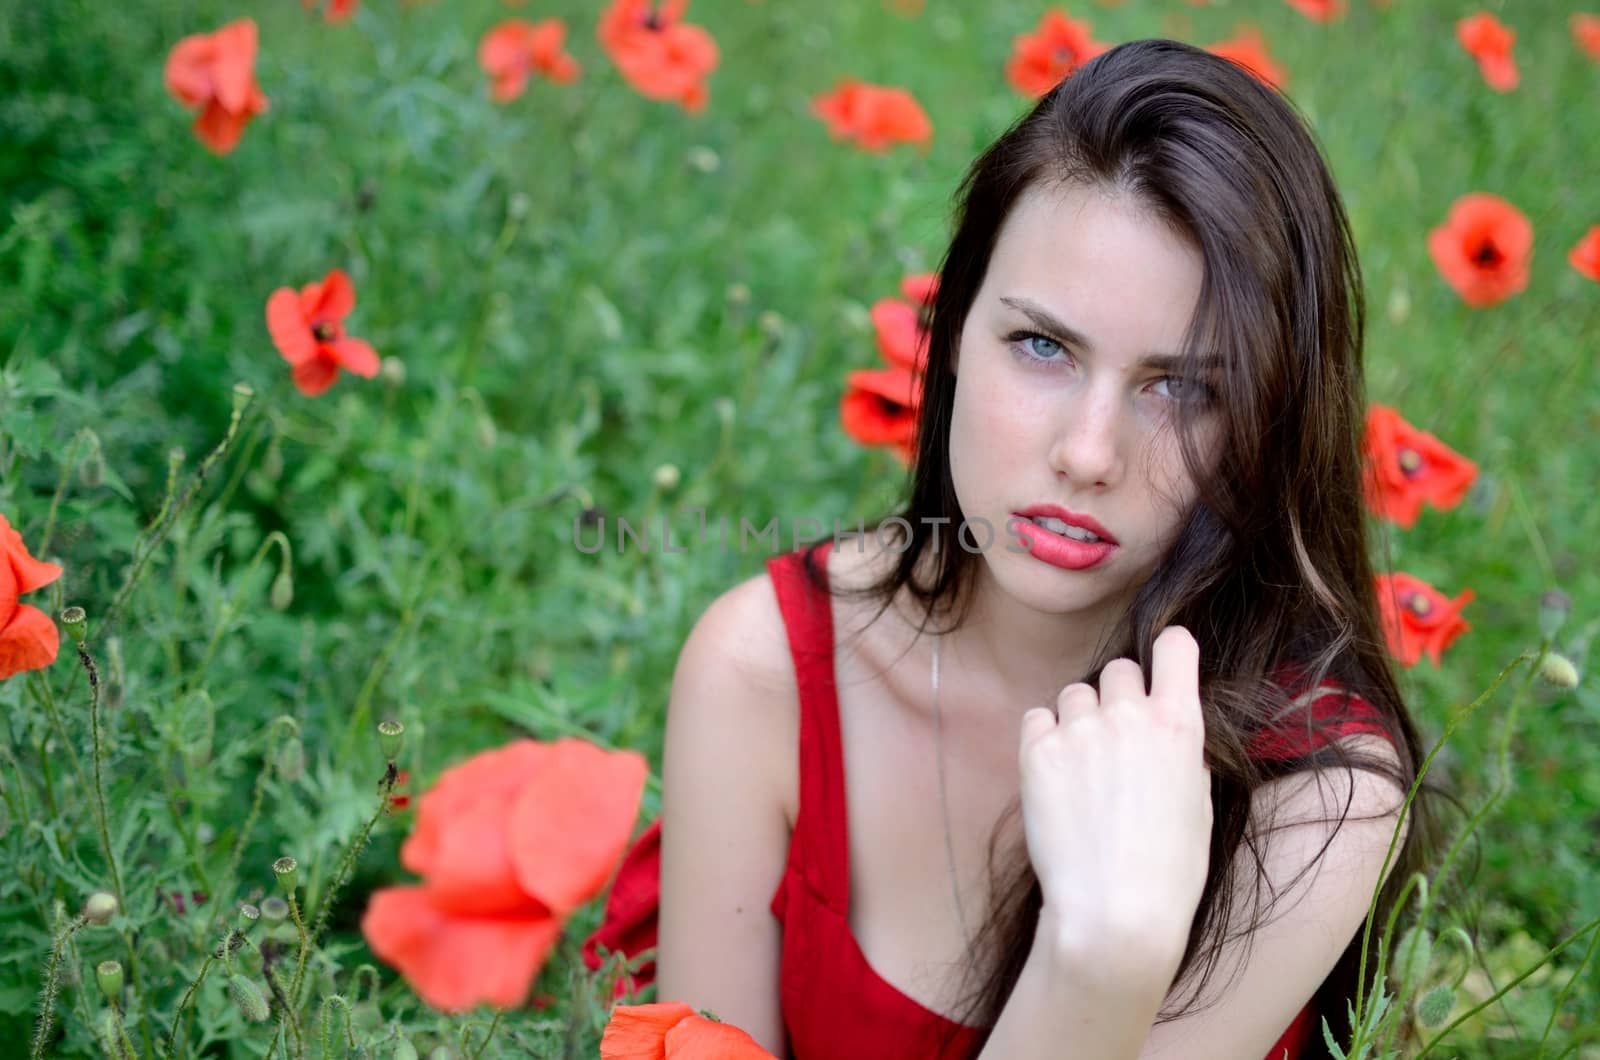 Young female model posing surrounded by poppies flowers. Brunette girl wearing red dress.